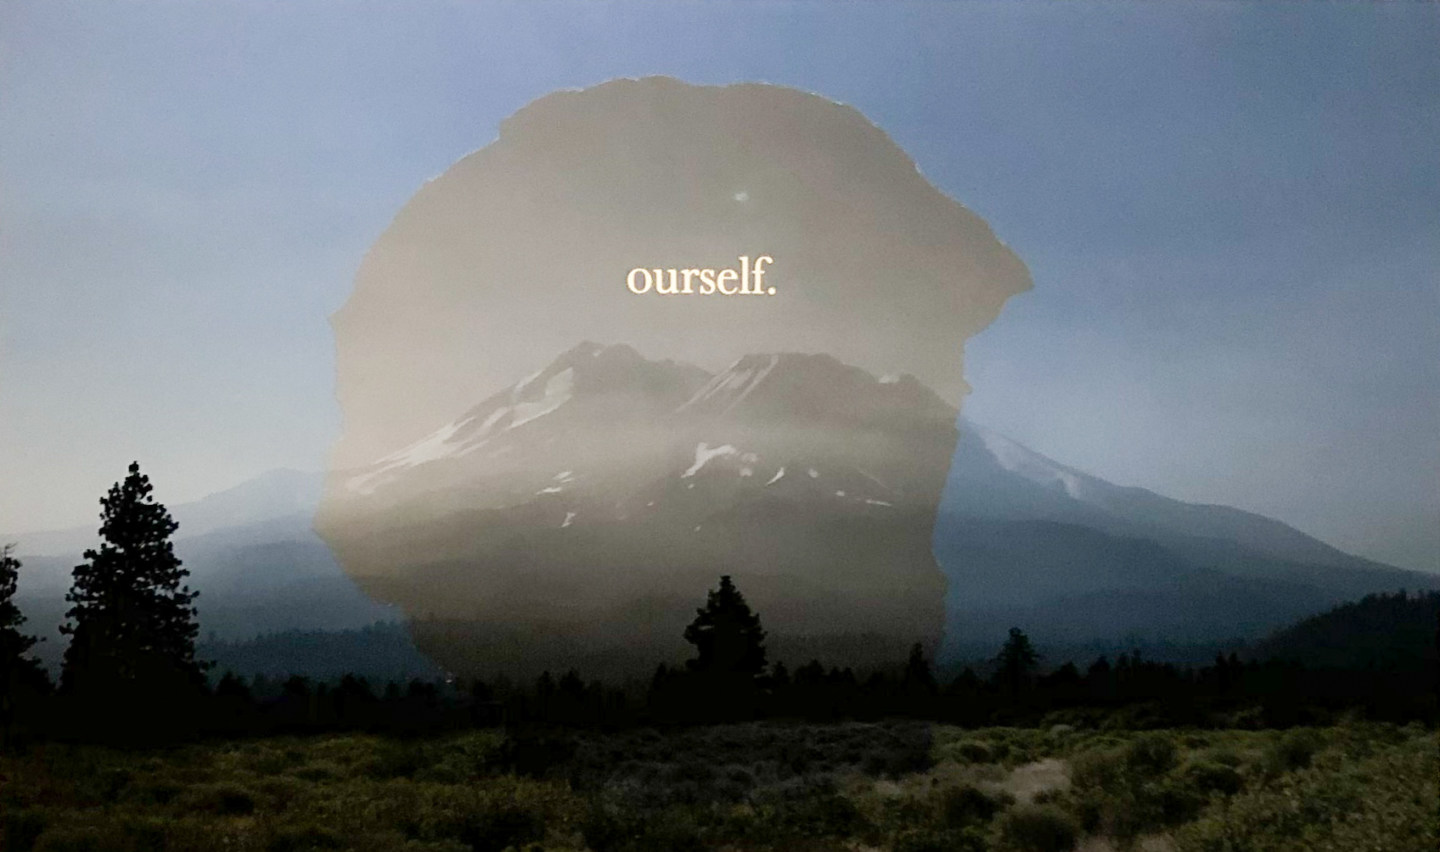 Color collage of a mountain with text reading "ourself." overlaid